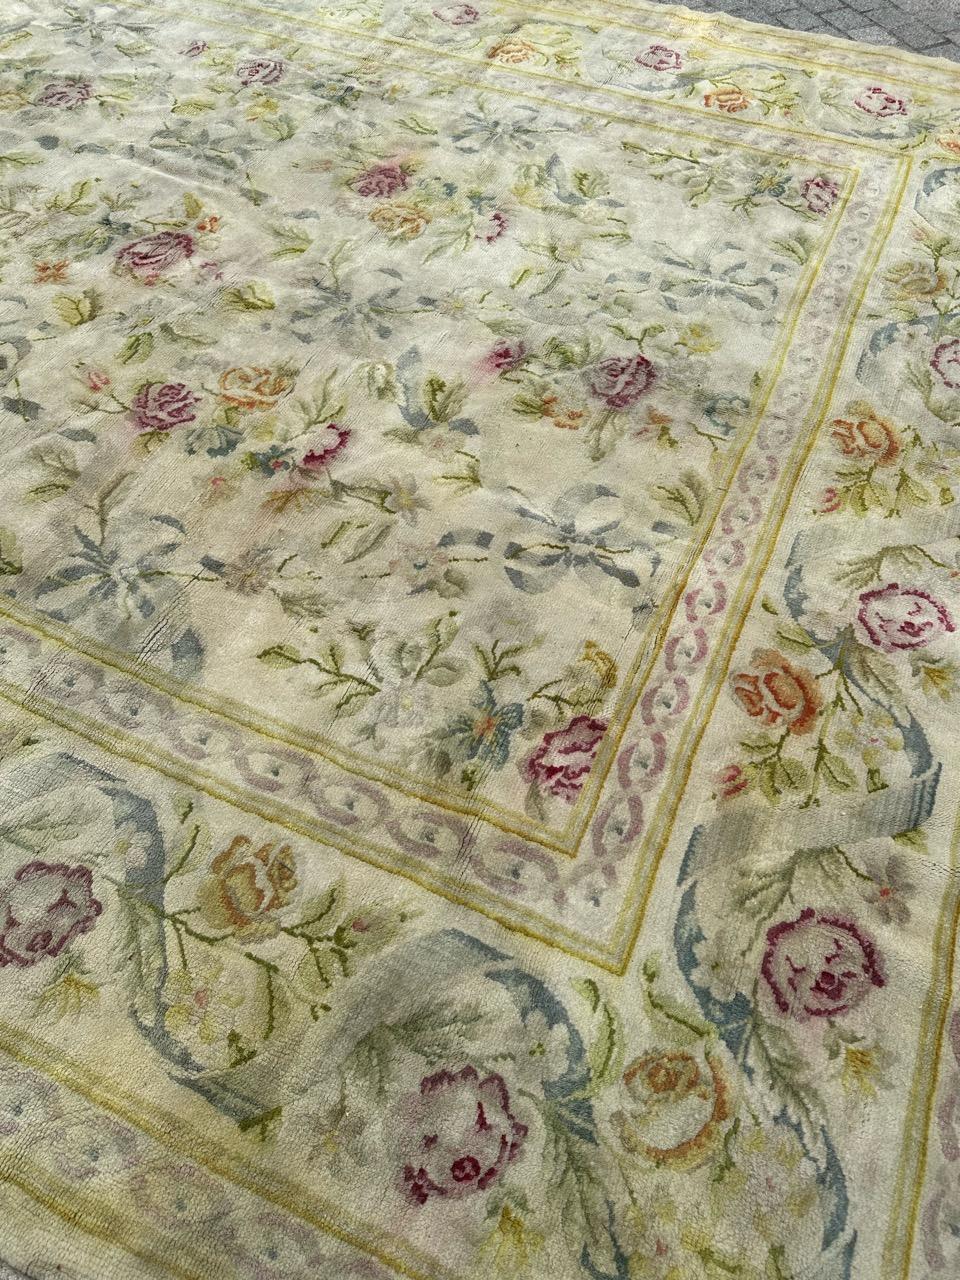 Introducing a stunning French Aubusson rug, featuring an exquisite floral design and soft, light colors. This beautiful, large rug is meticulously hand-knotted using wool velvet on a cotton foundation. The background boasts a graceful beige hue,